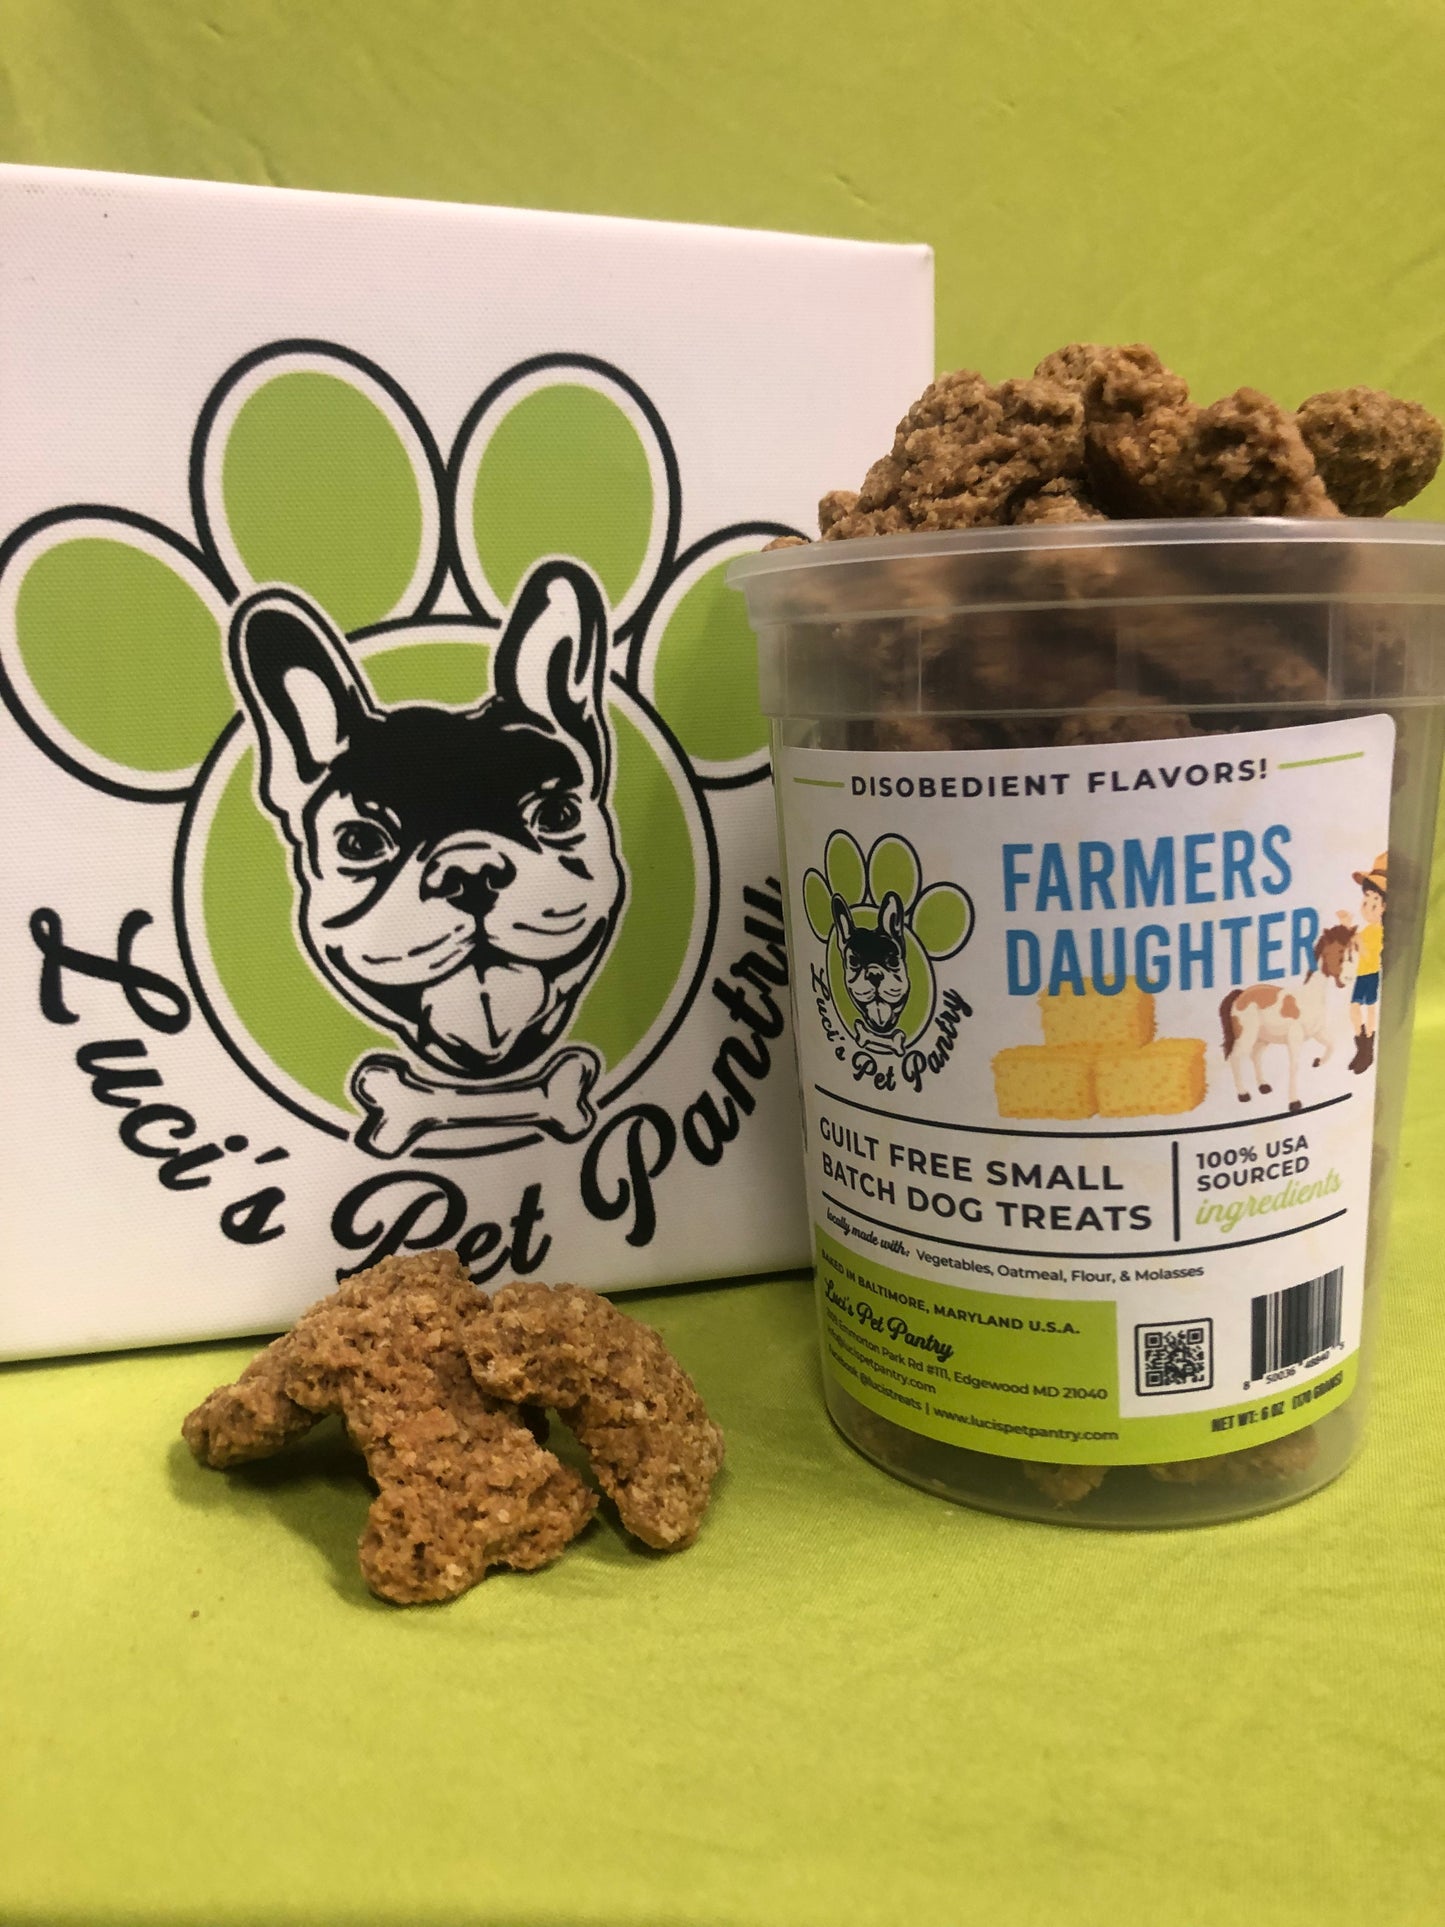 Farmer's Daughter - All Natural "Vegetable" Dog & Puppy Treats - Disobedient Tub of Biscuits